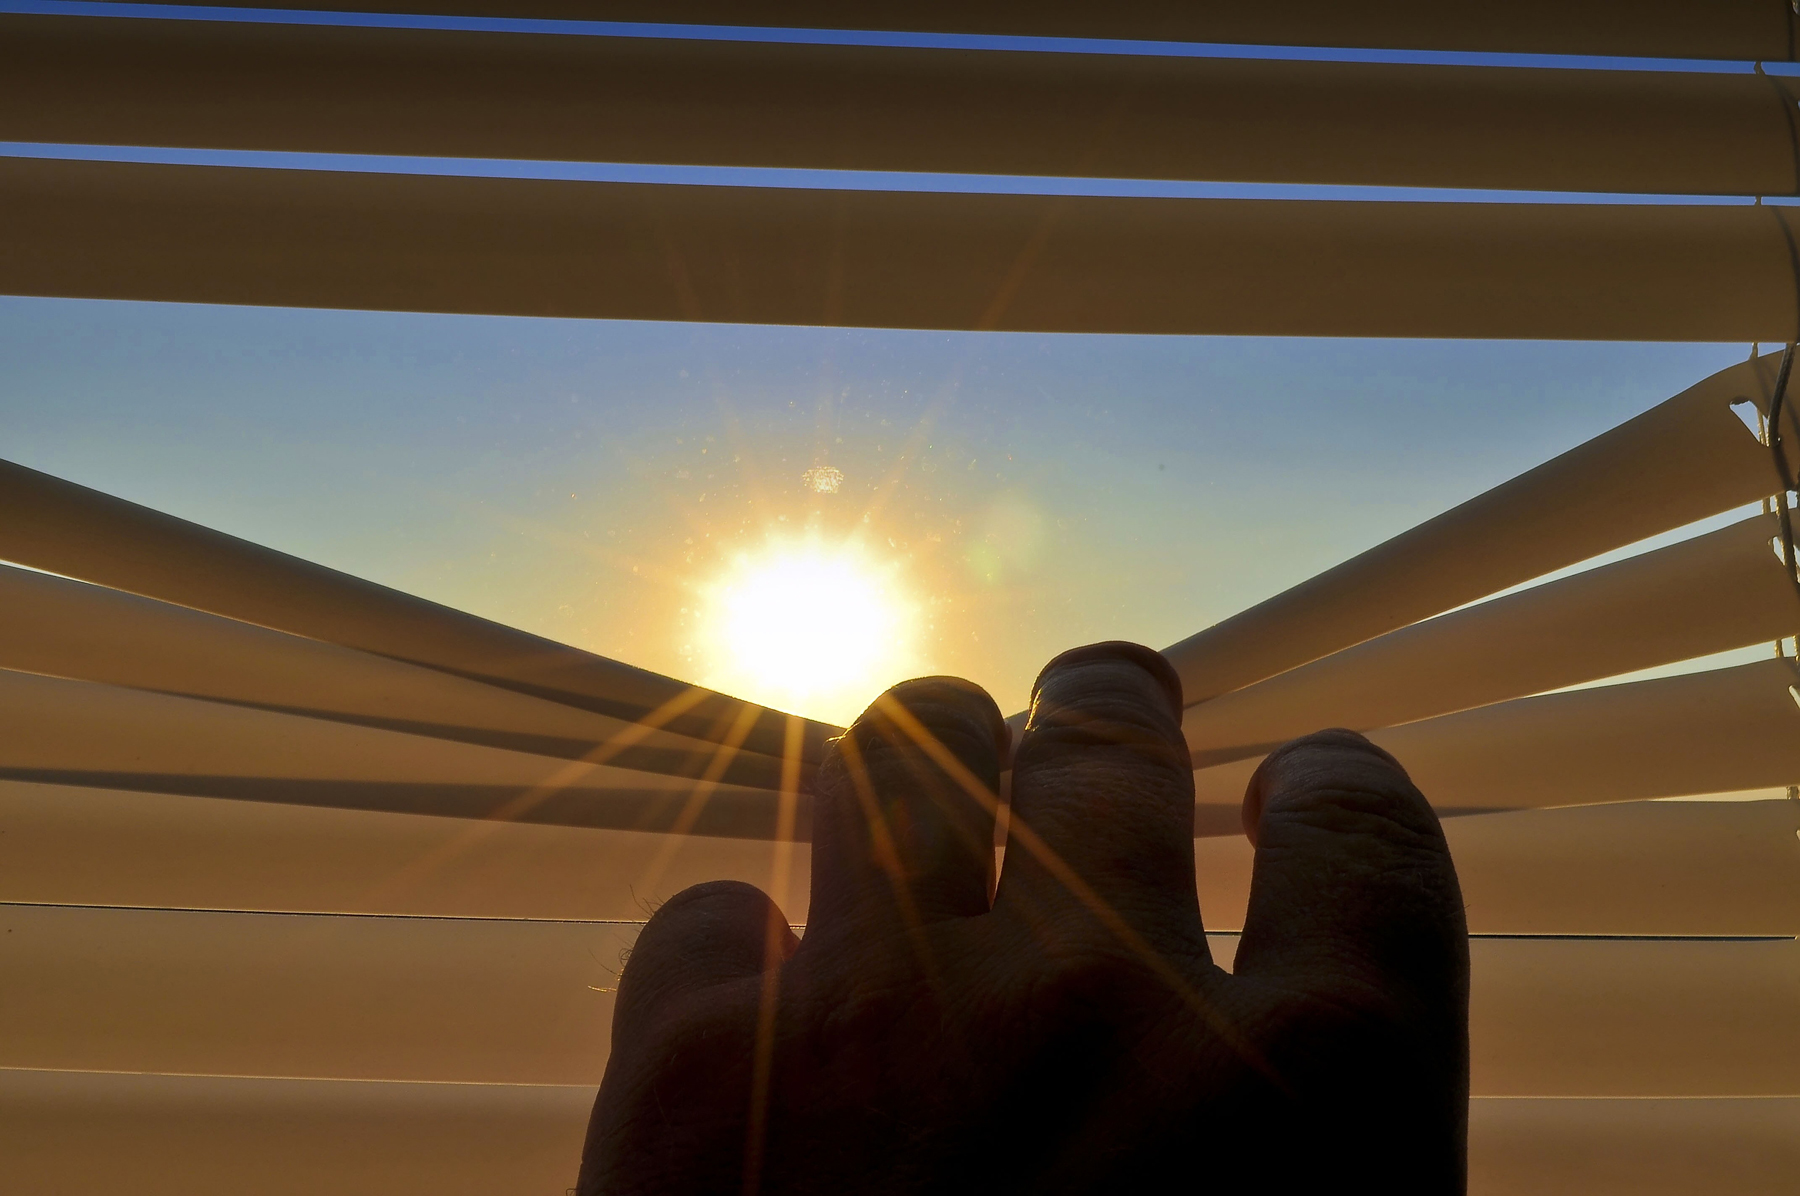 A person pulling down part of a window blind with the sun shining through